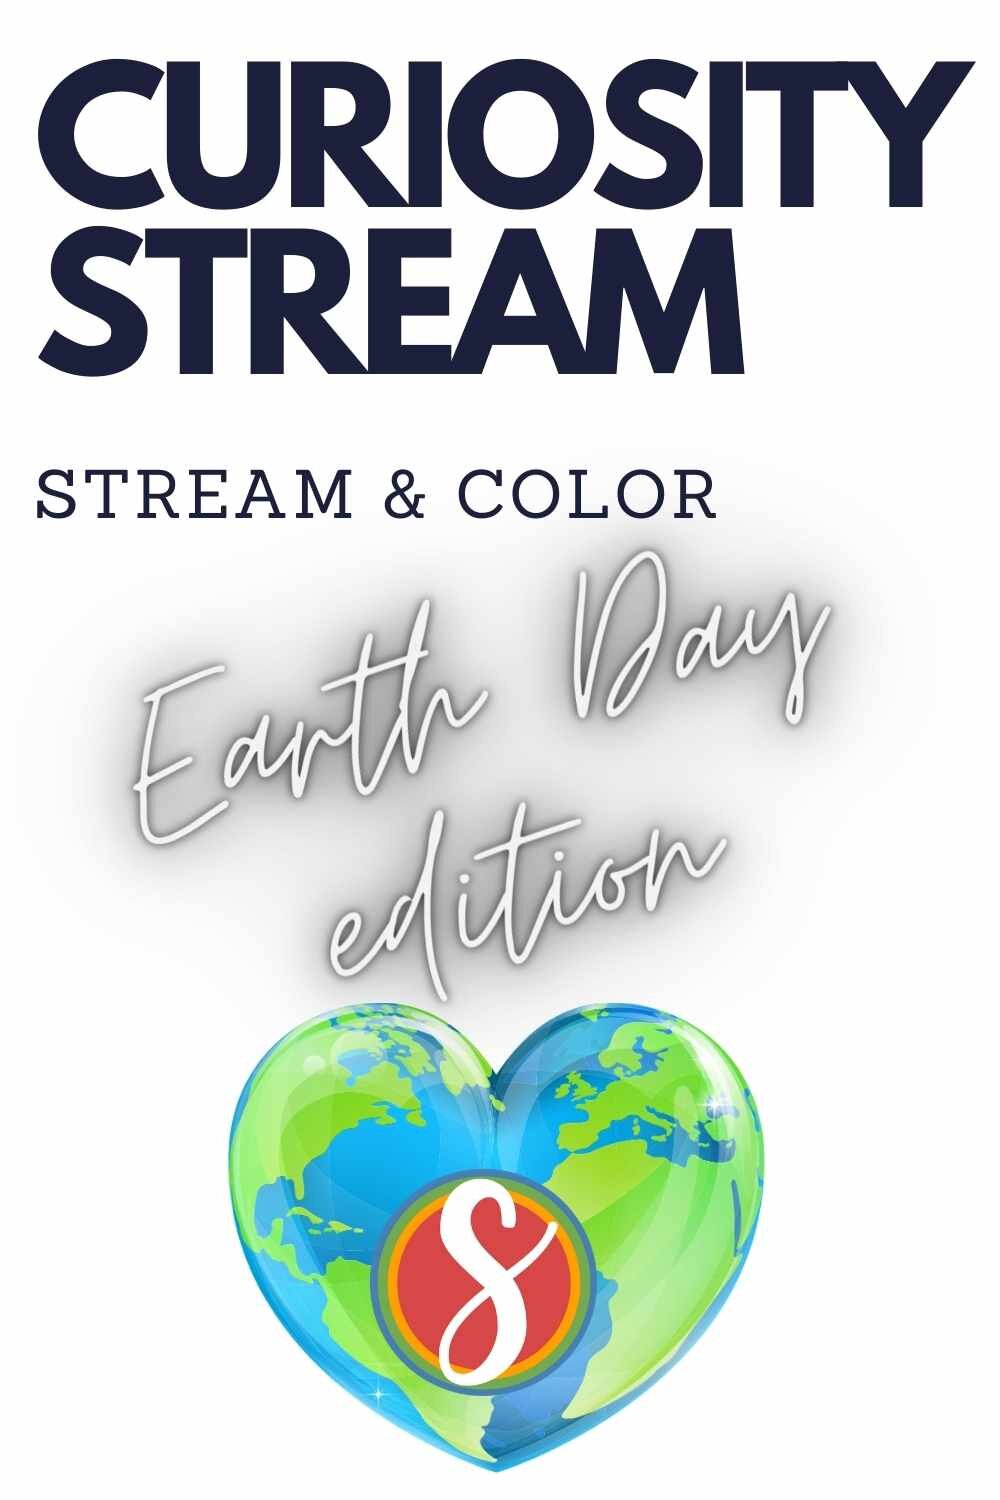 Free! Stream &amp; Color these free earth day-related coloring pages I made based on 4 different documentaries from Curiosity Stream